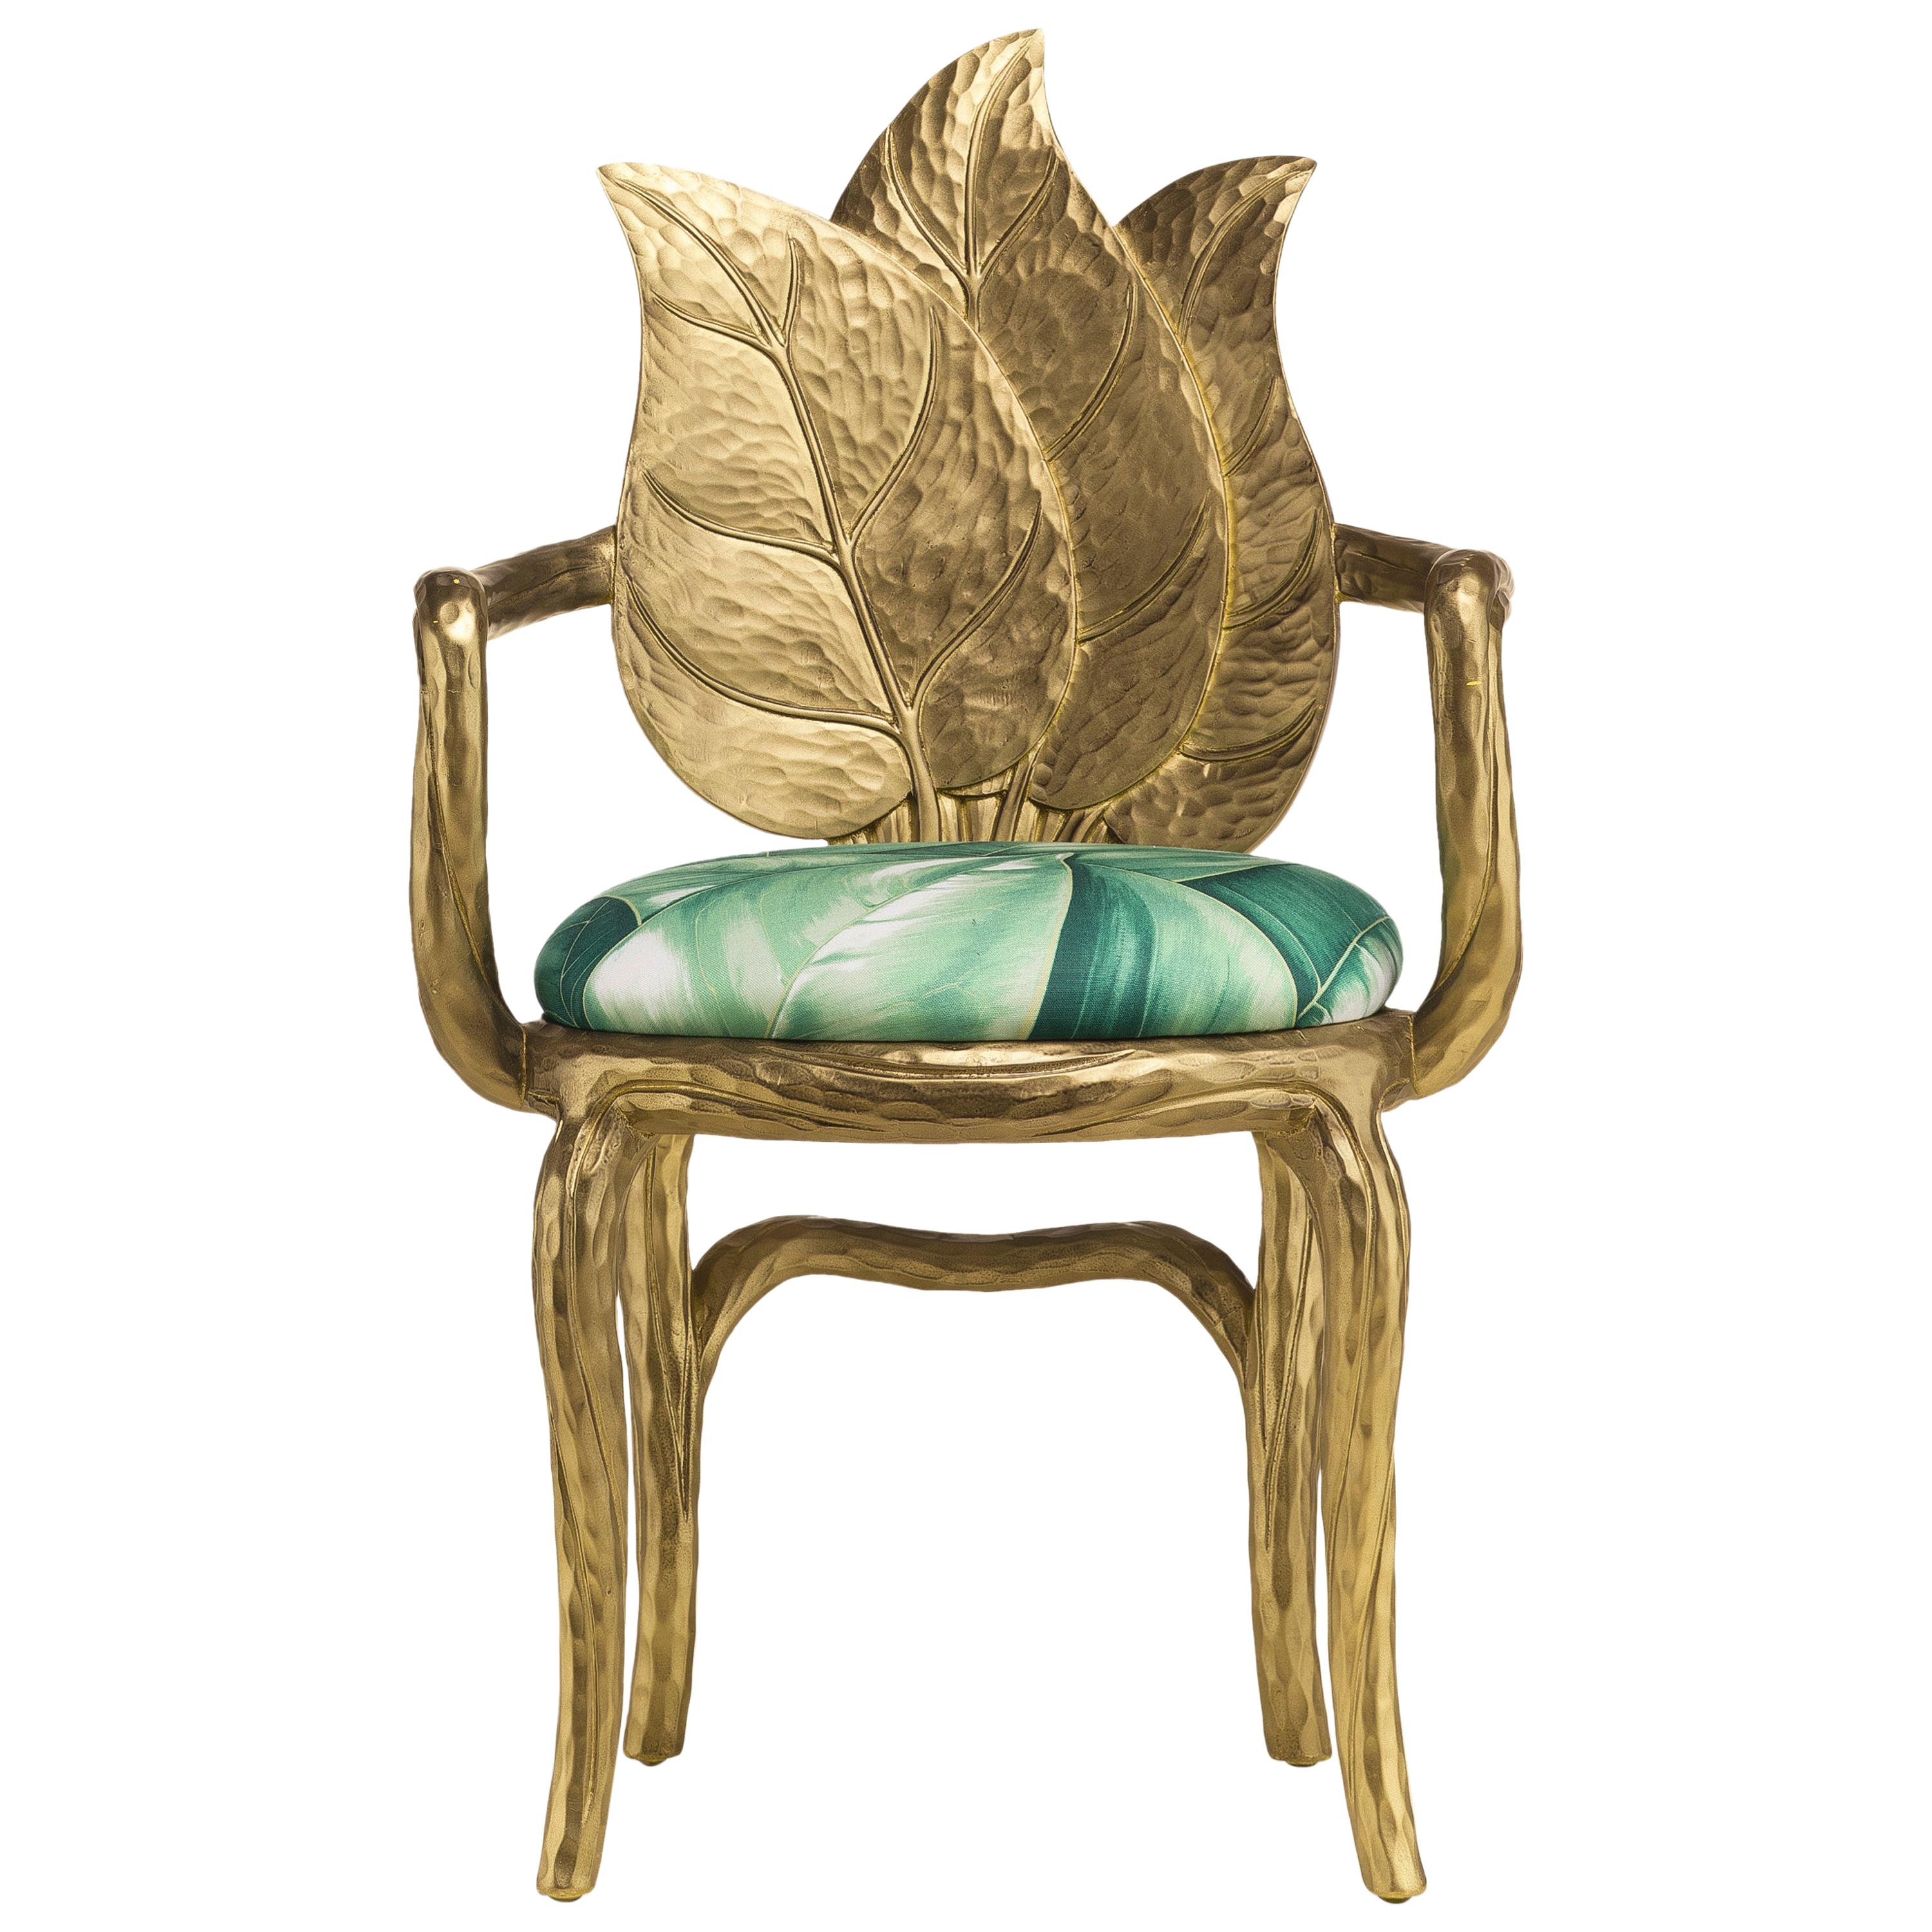 Clorophilla Hand Carved Armchair in Gold with Upholstered Seat